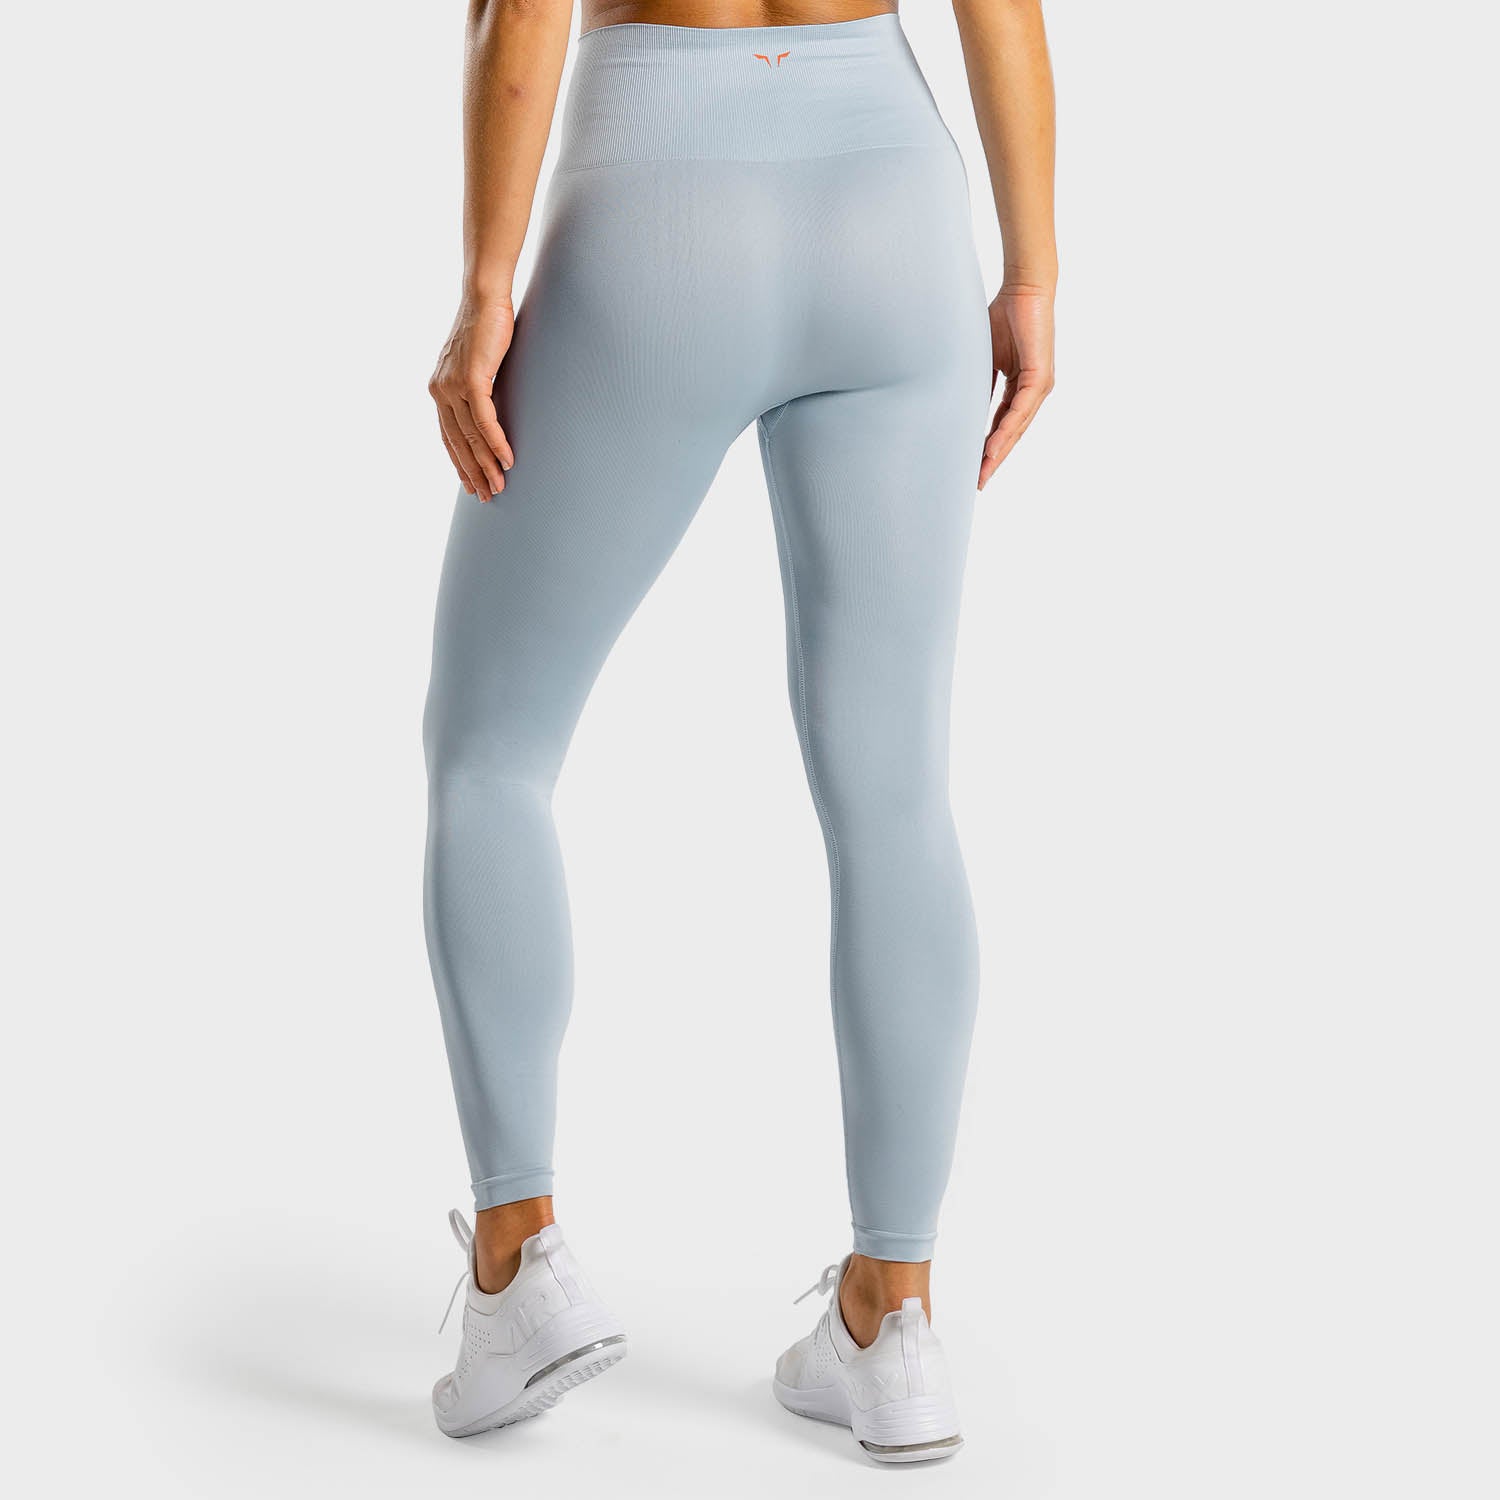 squatwolf-gym-leggings-for-women-core-seamless-leggings-grey-workout-clothes